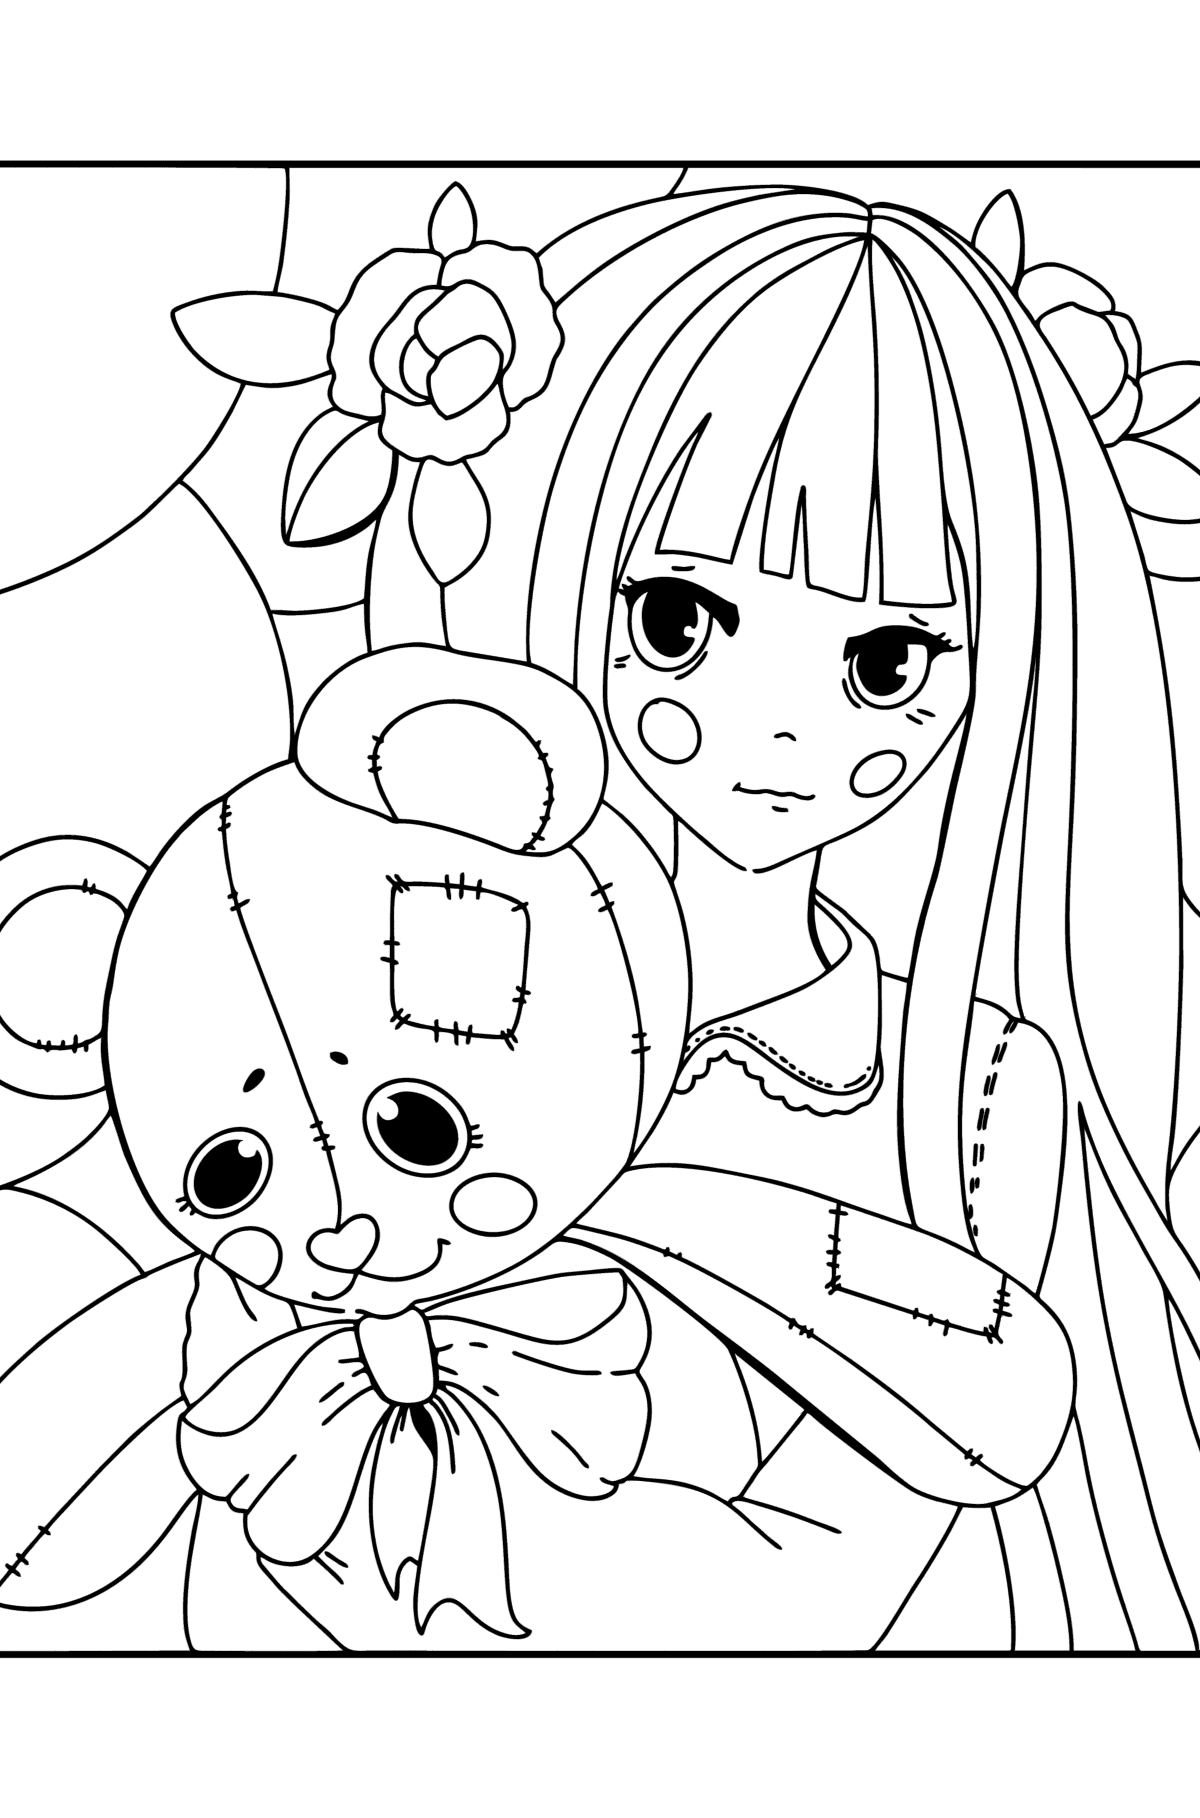 Anime girl coloring page holding a teddy ♥ Online and Print for Free